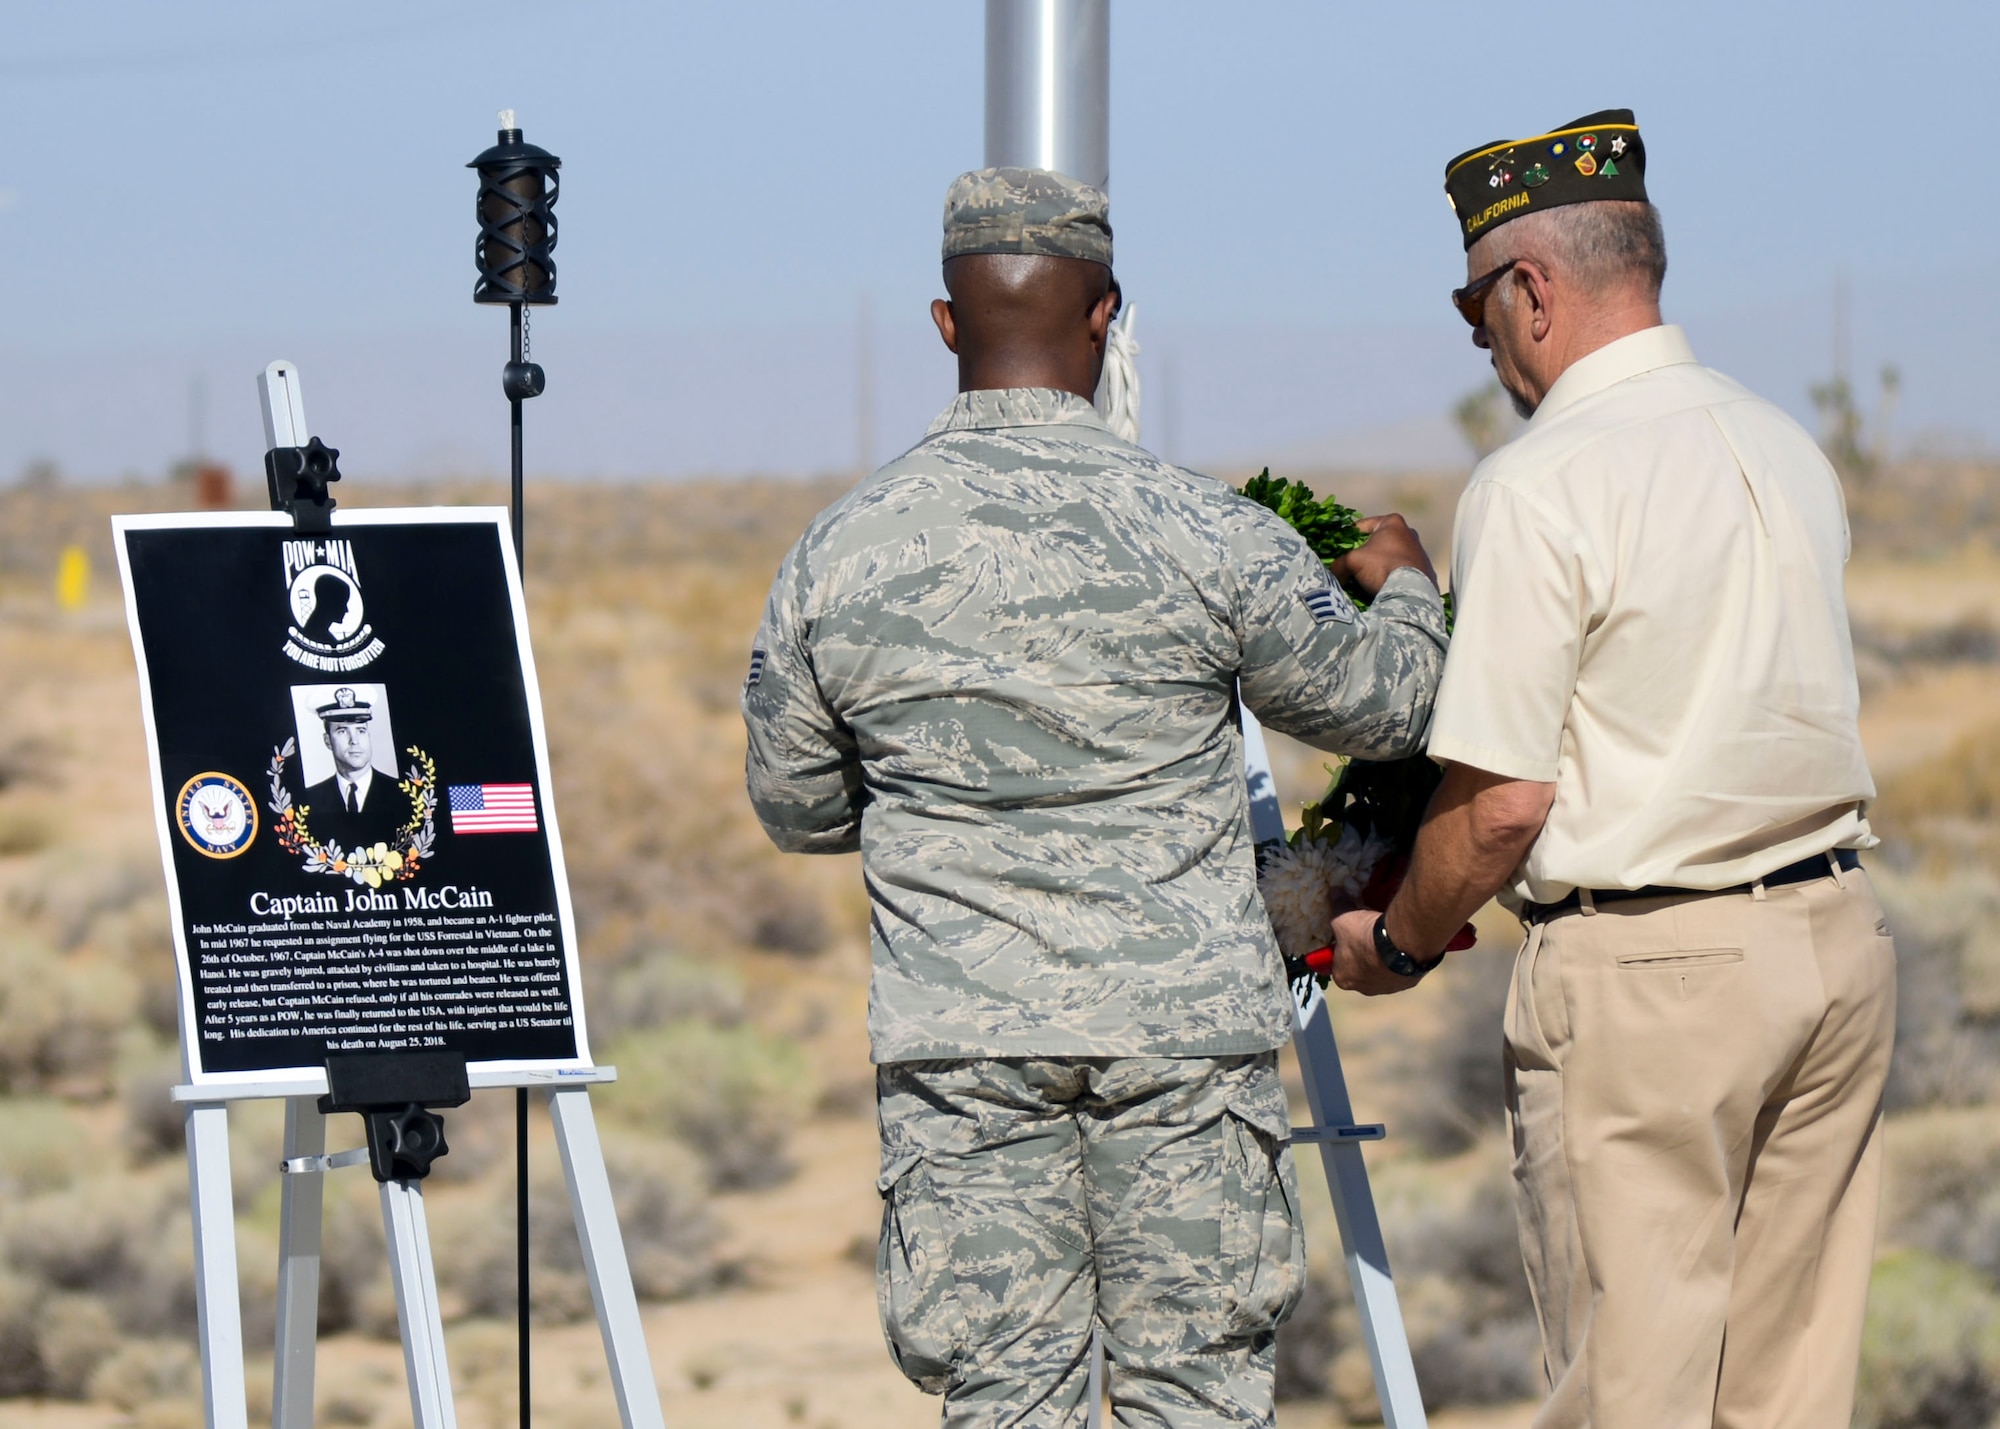 Staff Sgt. Matthew Buckner, 412th Training Wing Staff Judge Advocate’s Office, and Army Veteran Joseph Antone, a member of the Veterans of Foreign Wars Post 9657, lay a wreath next to a photo of the late Sen. John McCain during a wreath-laying ceremony commemorating National POW/MIA Recognition Day at the Airman Leadership School Drill Pad at Edwards Air Force Base, California, Sept. 21. Prior to serving as U.S. Senate member, McCain served as a Navy pilot when he was shot down over Hanoi, Vietnam and held as a prisoner of war for more than five years. (U.S. Air Force photo by Giancarlo Casem)